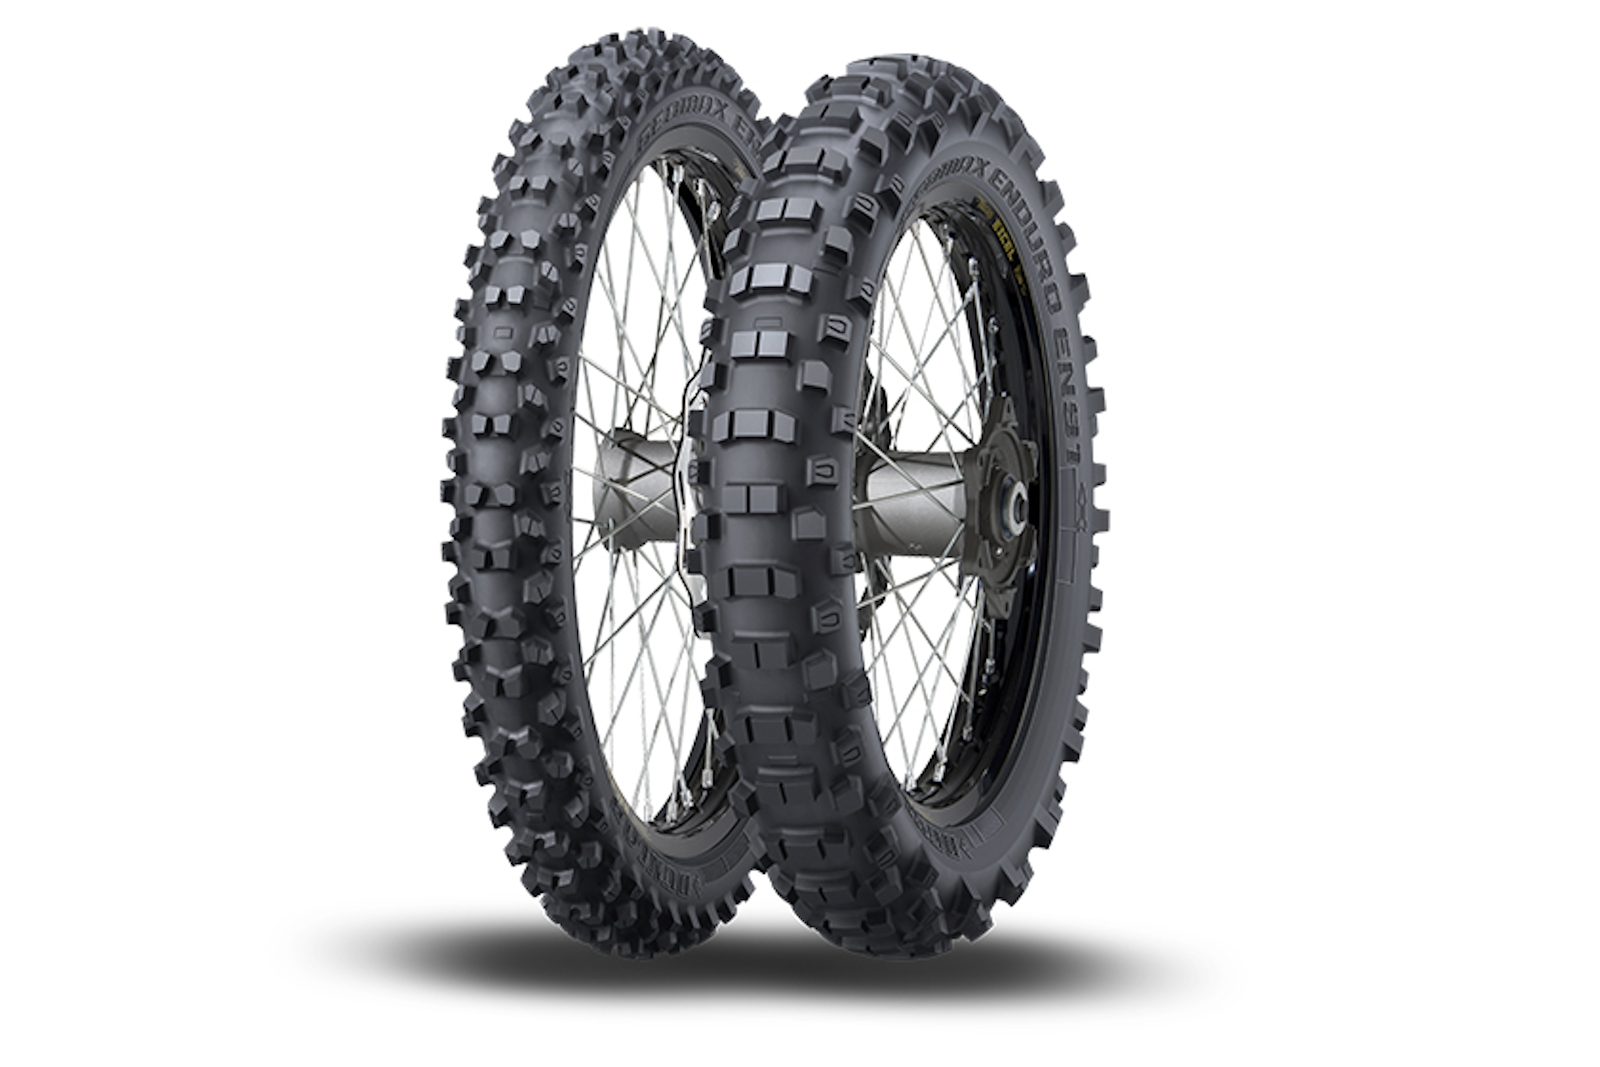 The Dunlop Geomax EN91 – the tyre that won the 2019 ISDE